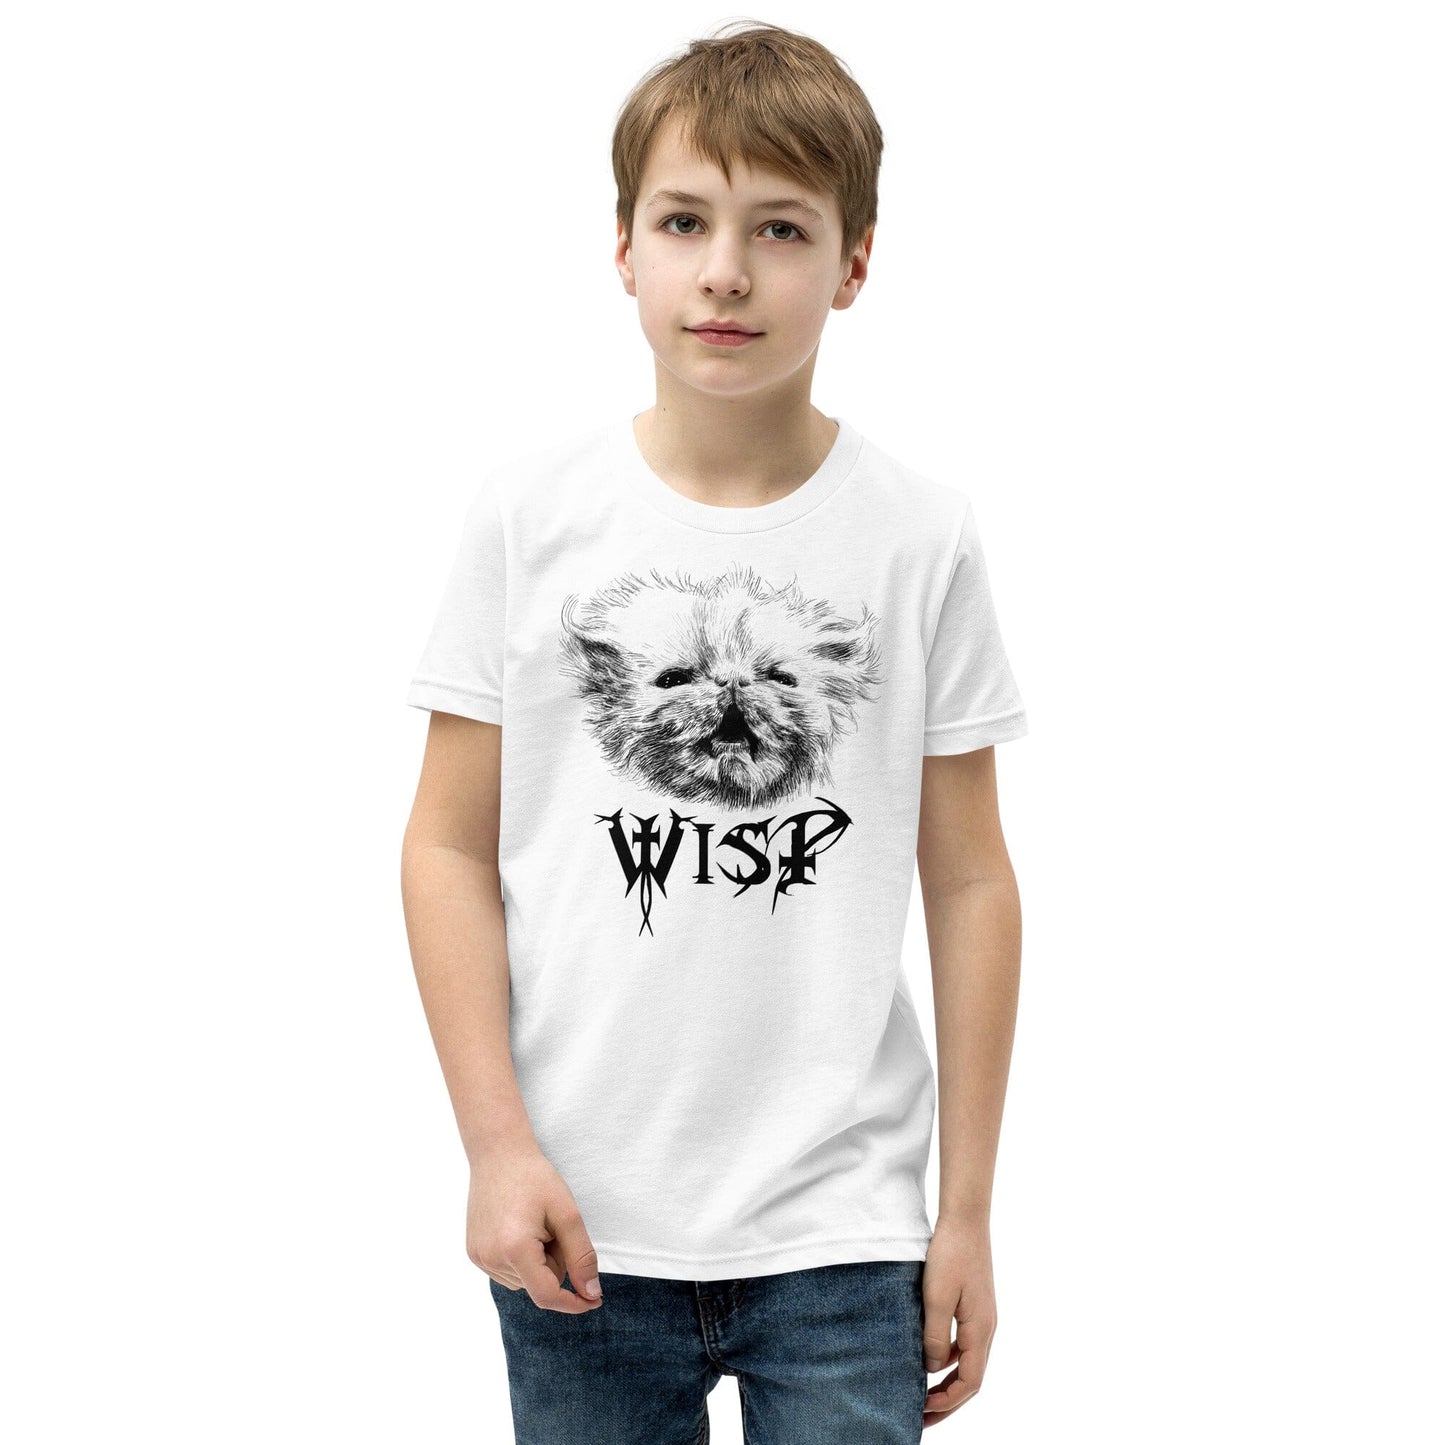 Metal Wisp YOUTH T-Shirt [Unfoiled] (All net proceeds go to Rags to Riches Animal Rescue) JoyousJoyfulJoyness White S 